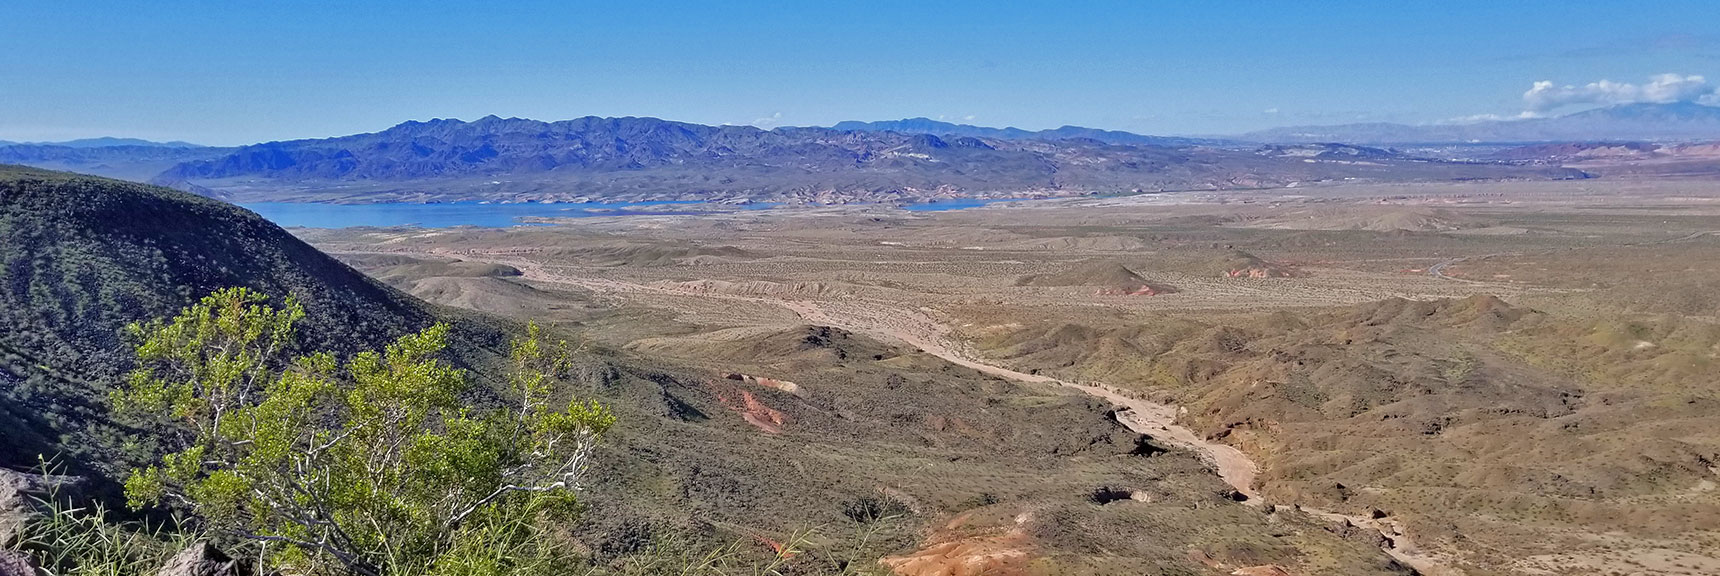 View Southwest Toward Lake Mead from Black Mesa in Lake Mead National Recreation Area, Nevada